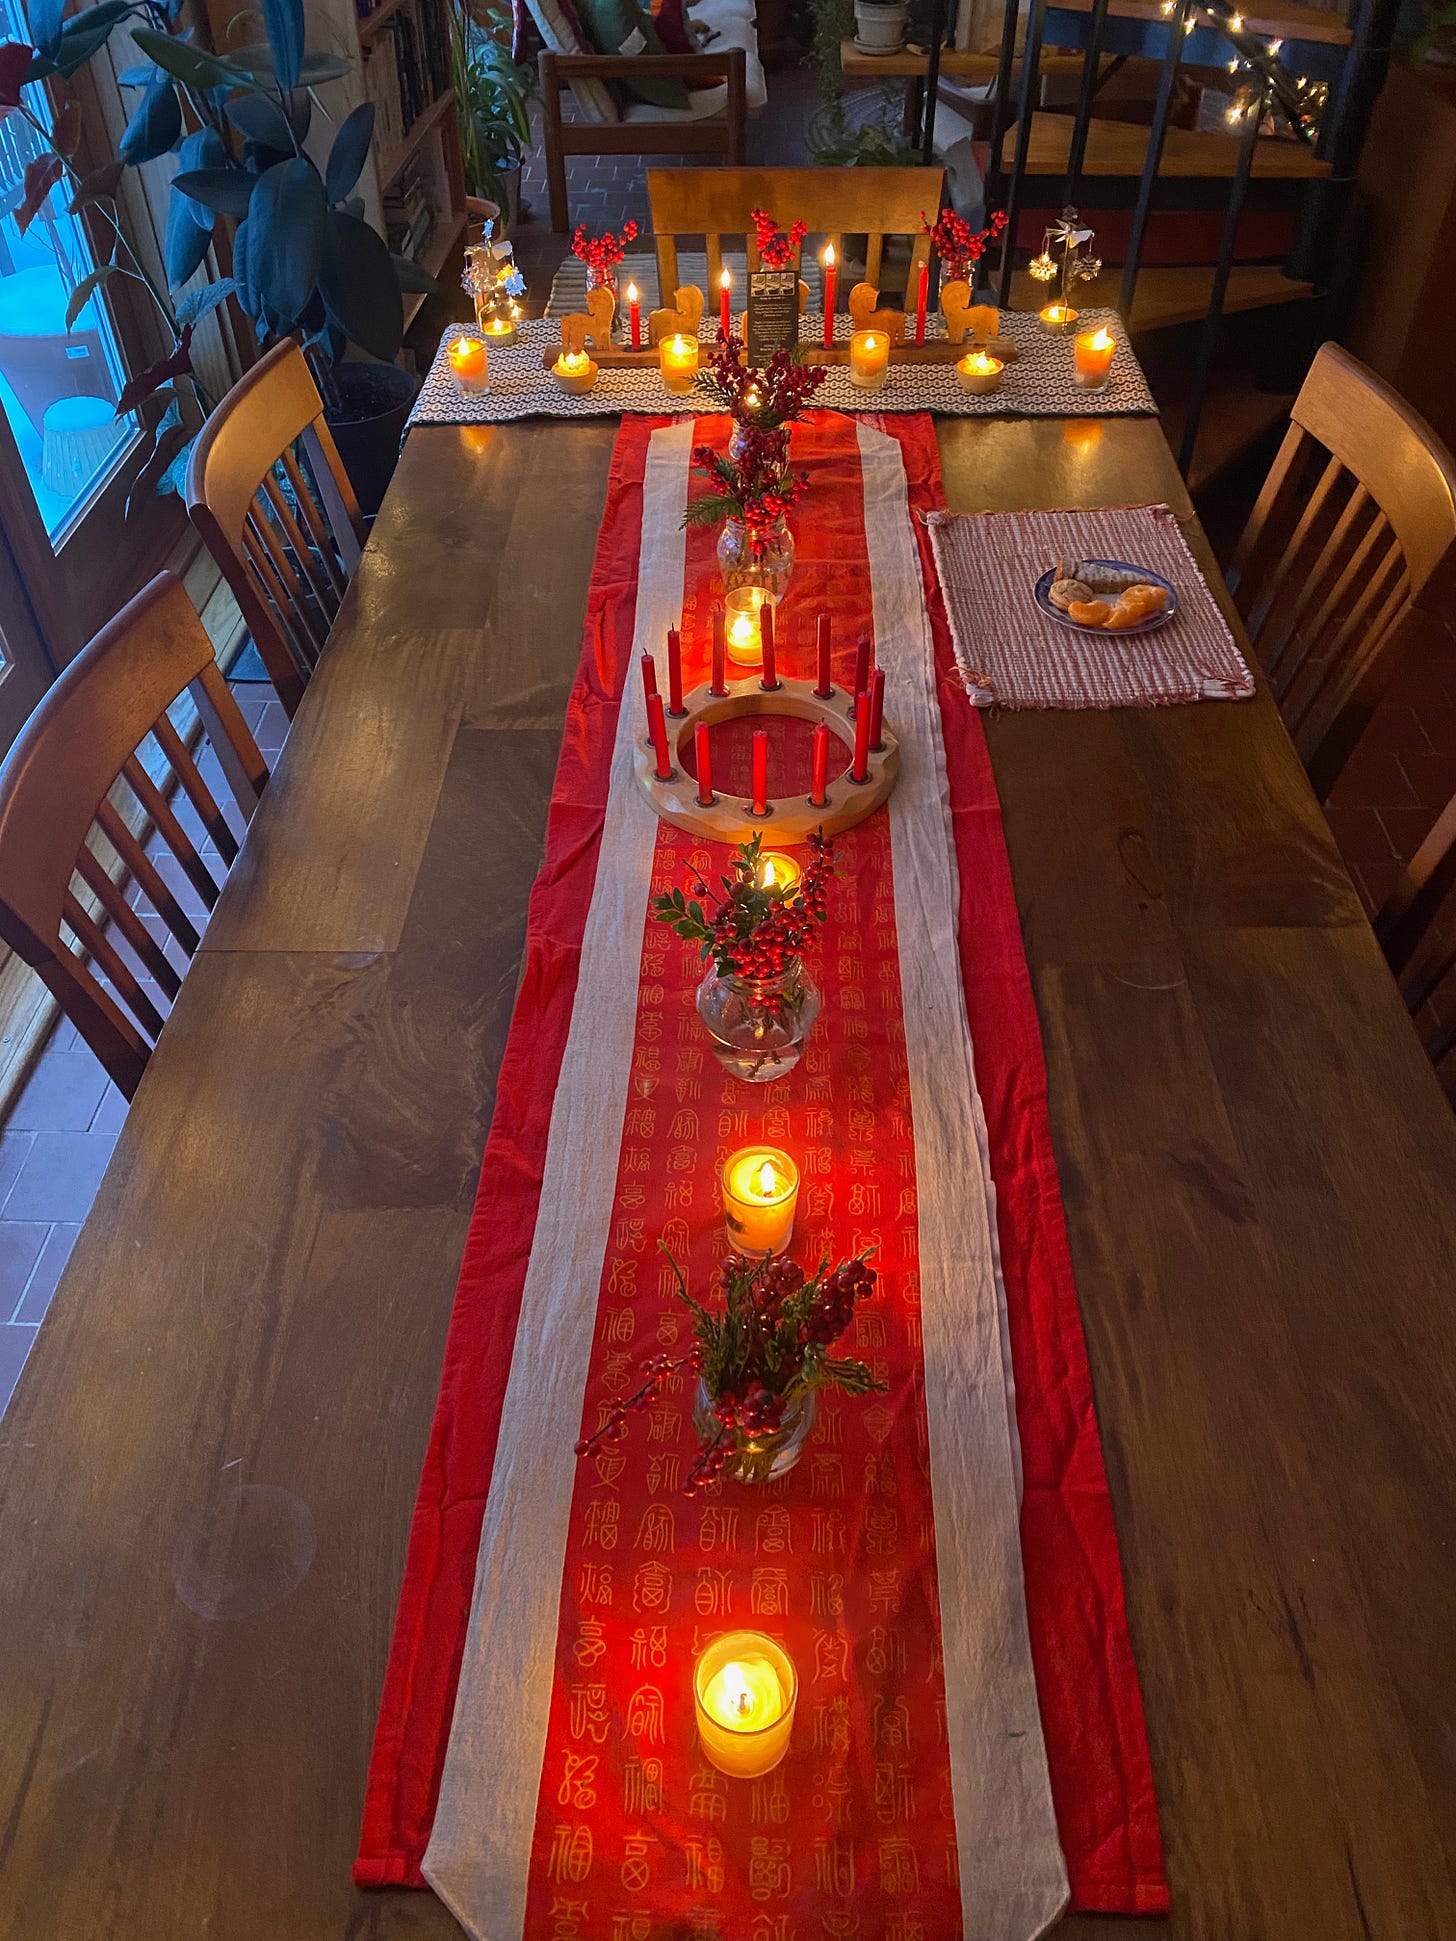 View from above of a table with red runner. Arranged on the runner are alternating jars of winterberry and lit candles. A circular candleholder sits in the middle, and at the end of the table is a green and white woven cloth with more candles and jars of winterberry.